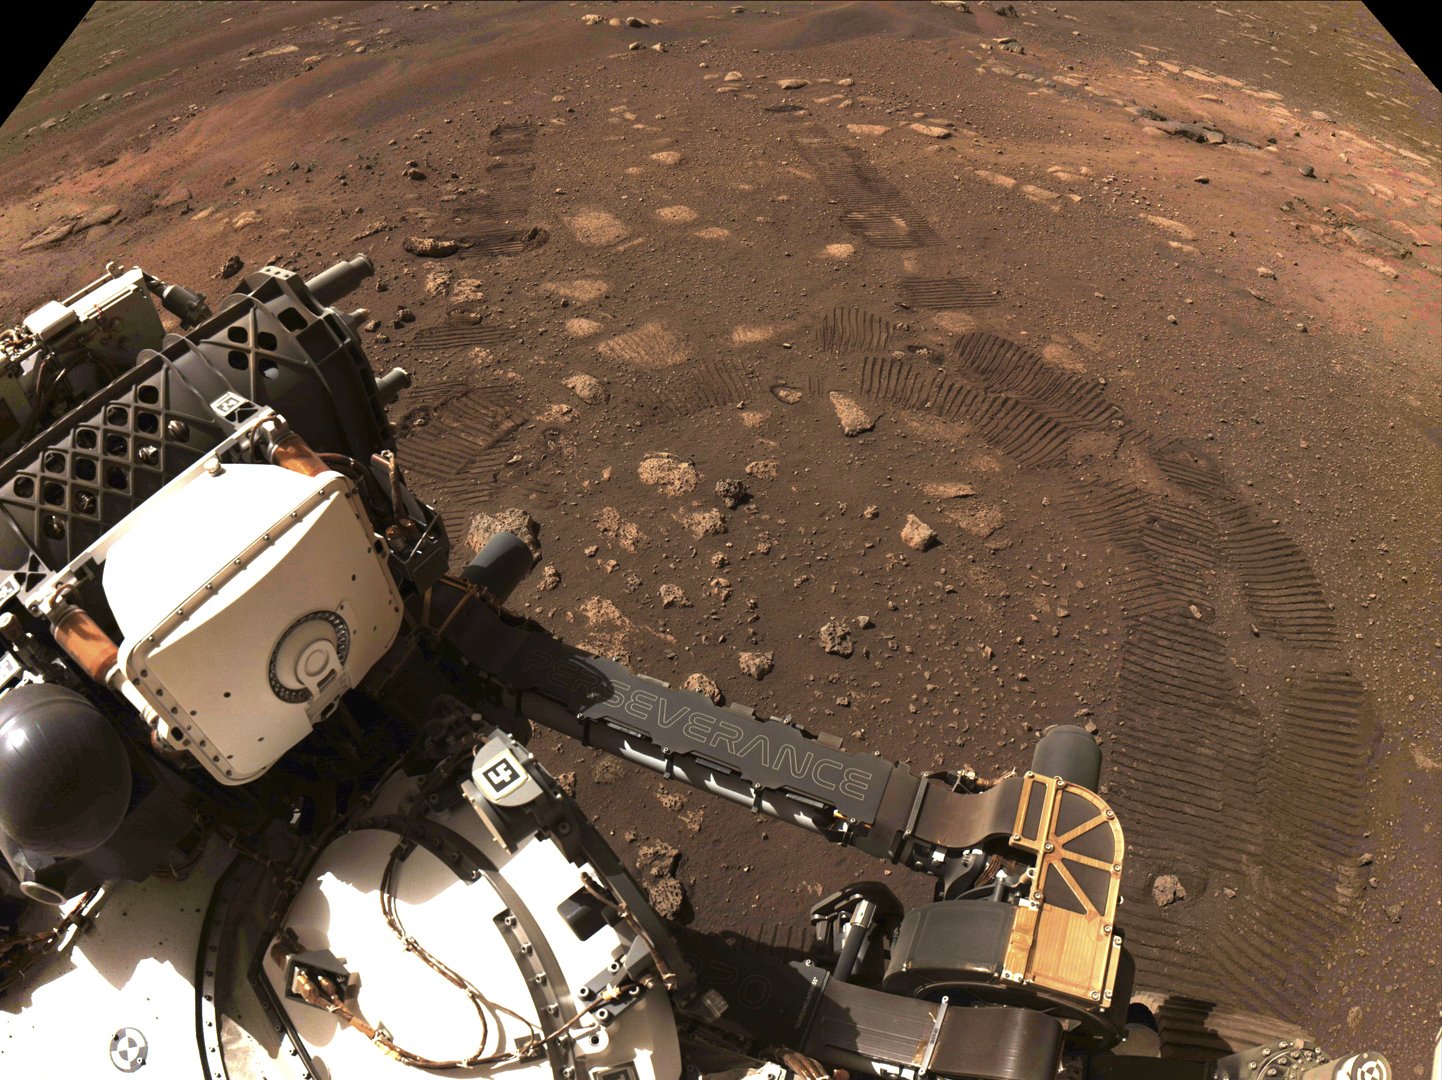 NASA’s new Mars rover hits the dusty red road, first trip at 21 feet